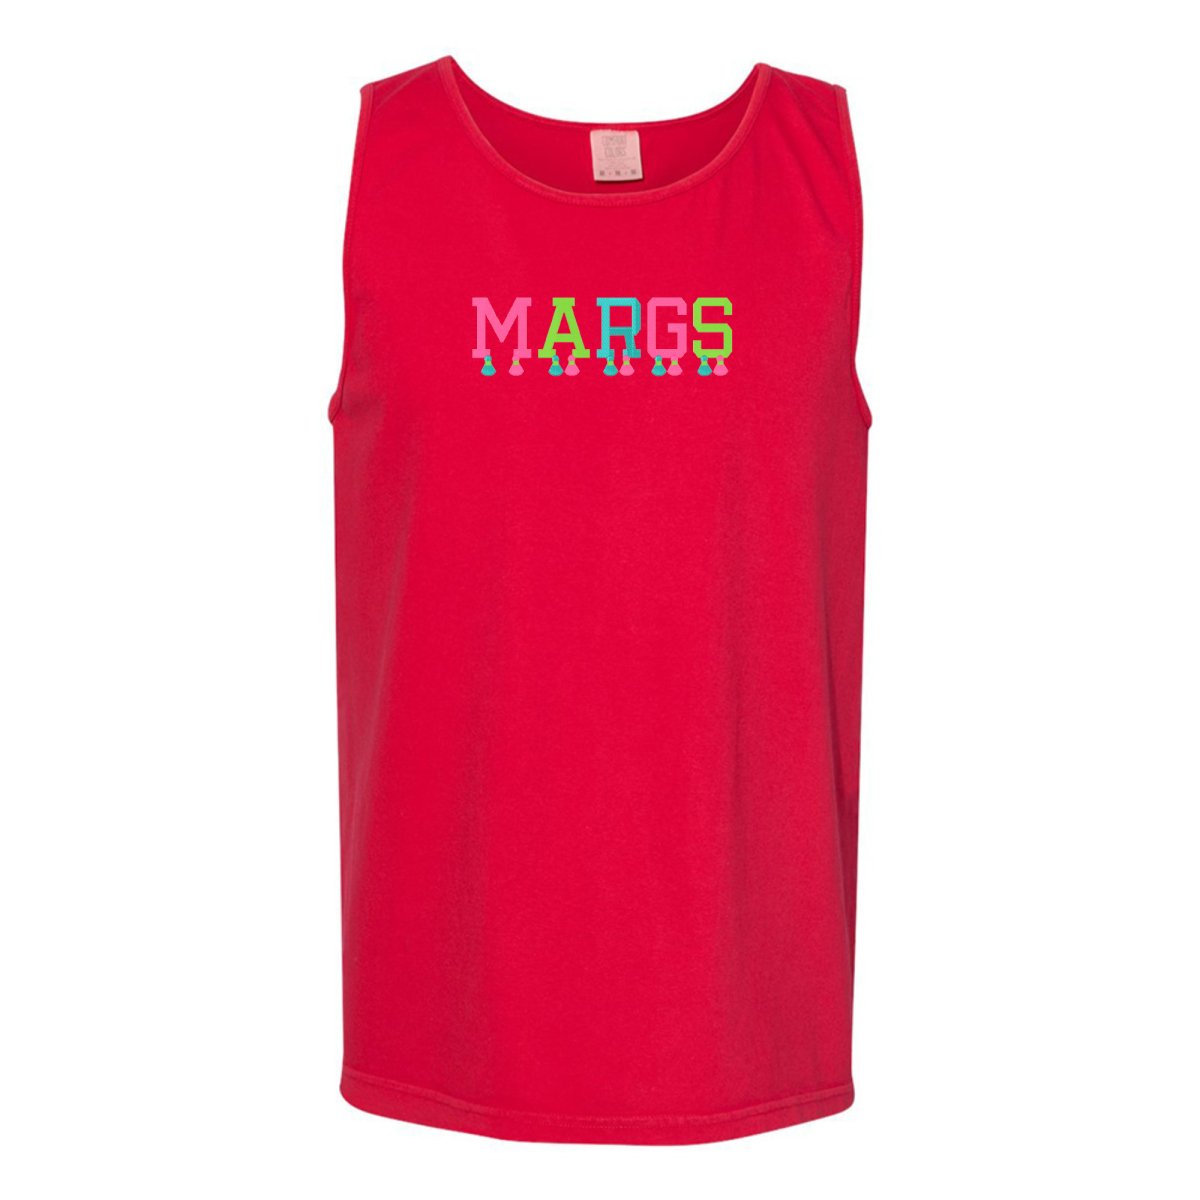 Embroidered Tasseled 'Margs' Tank Top - United Monograms